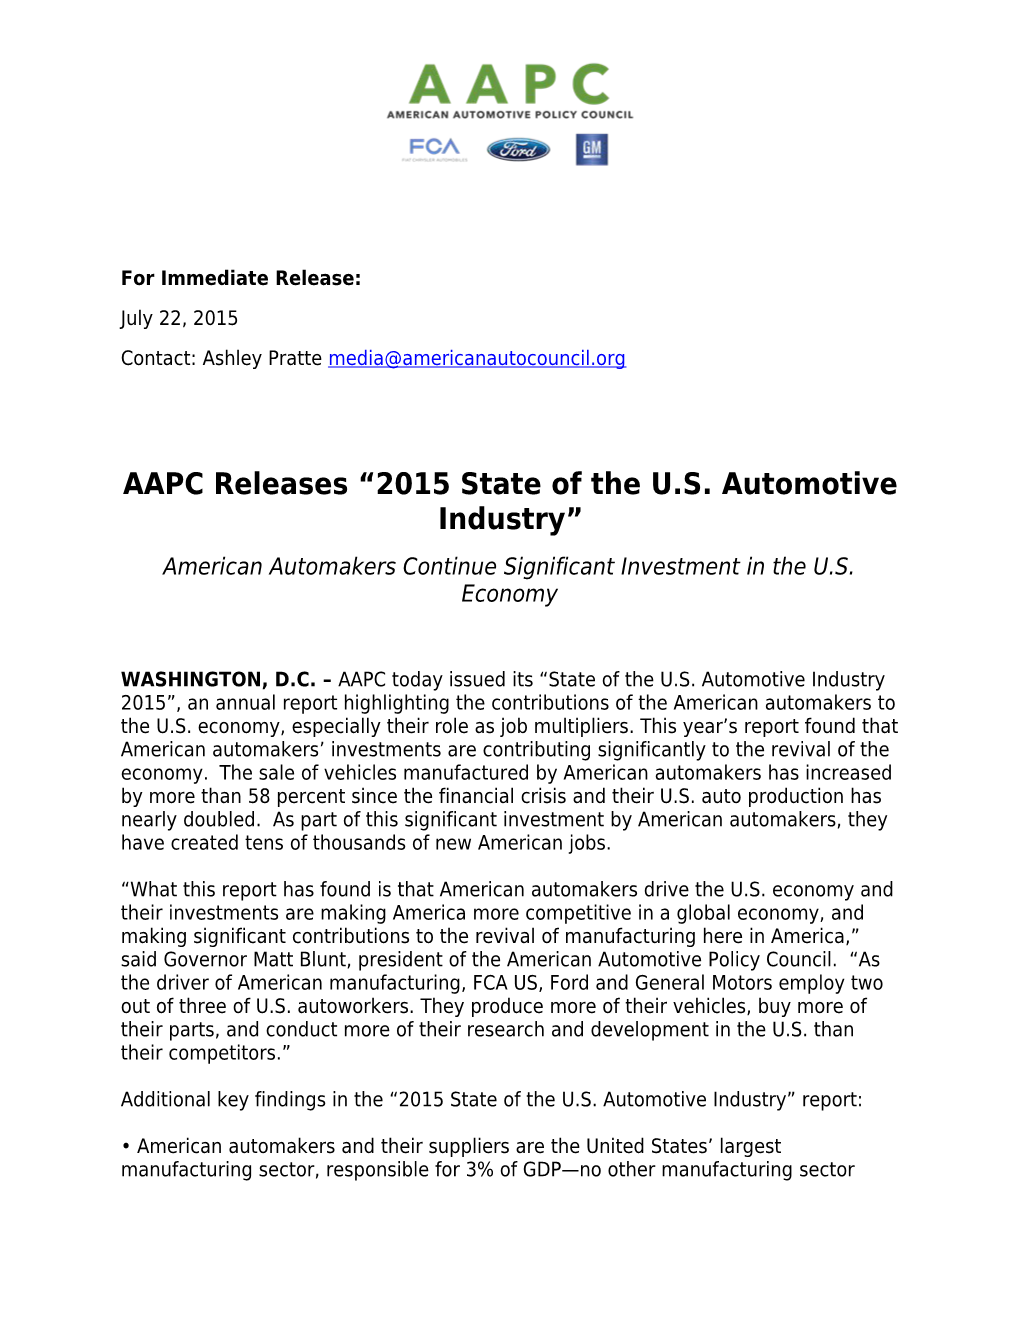 AAPC Releases 2015 State of the U.S. Automotive Industry